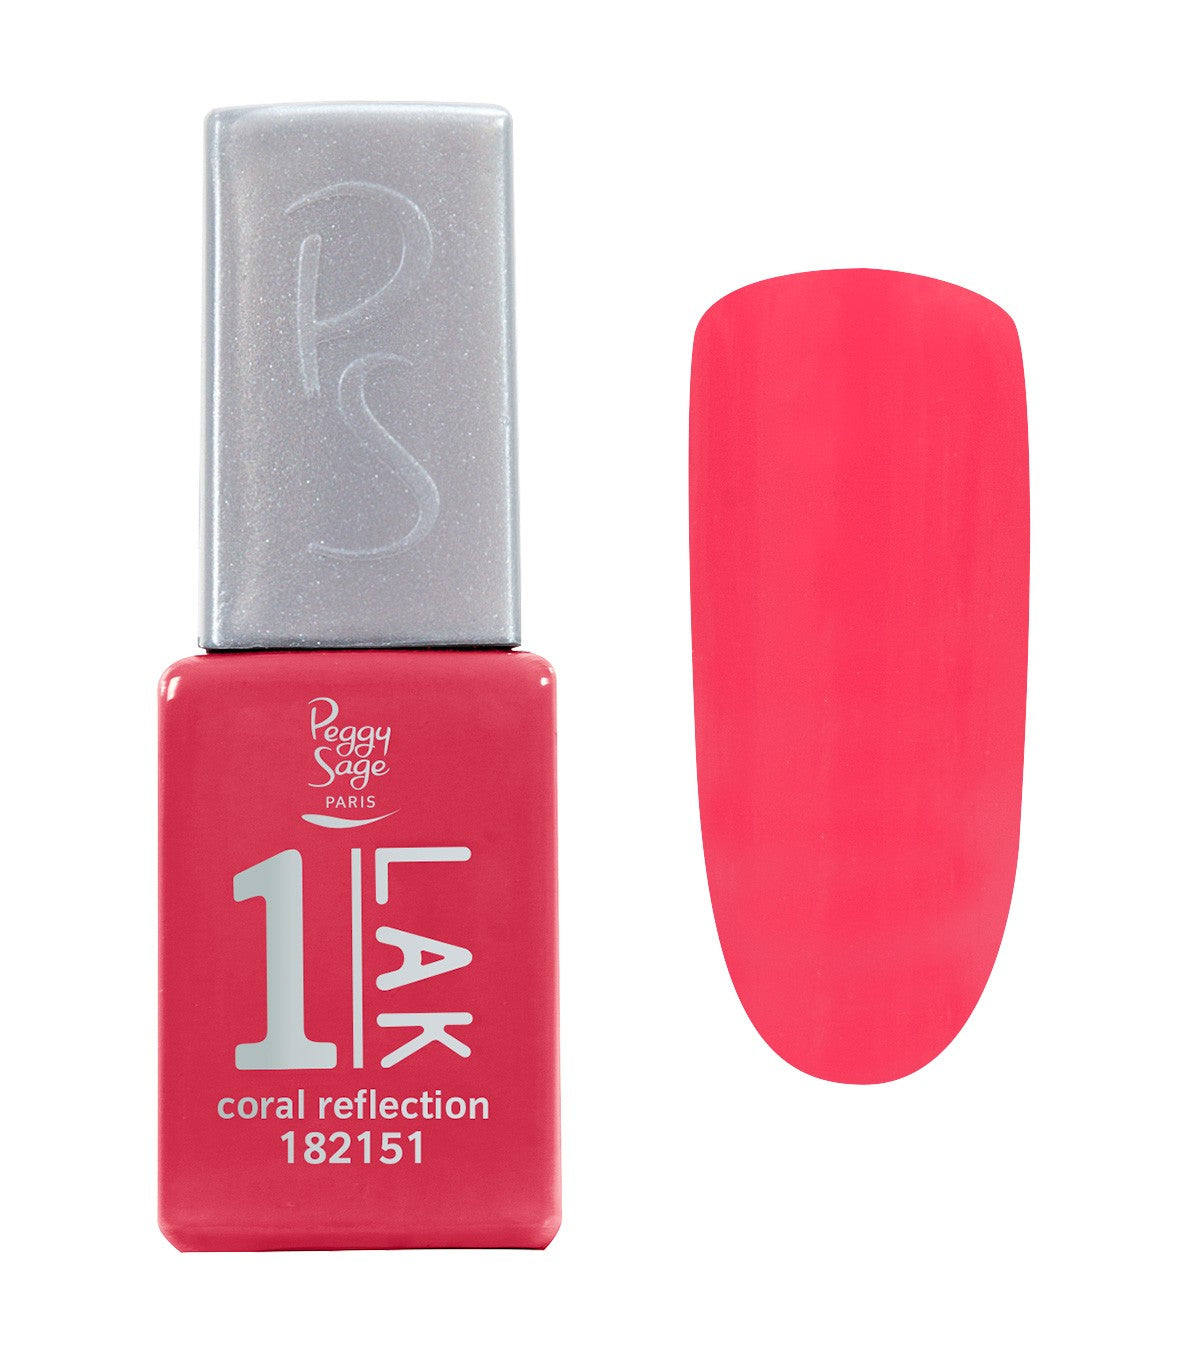 1-LACQUER Coral Reflection Ref 182151